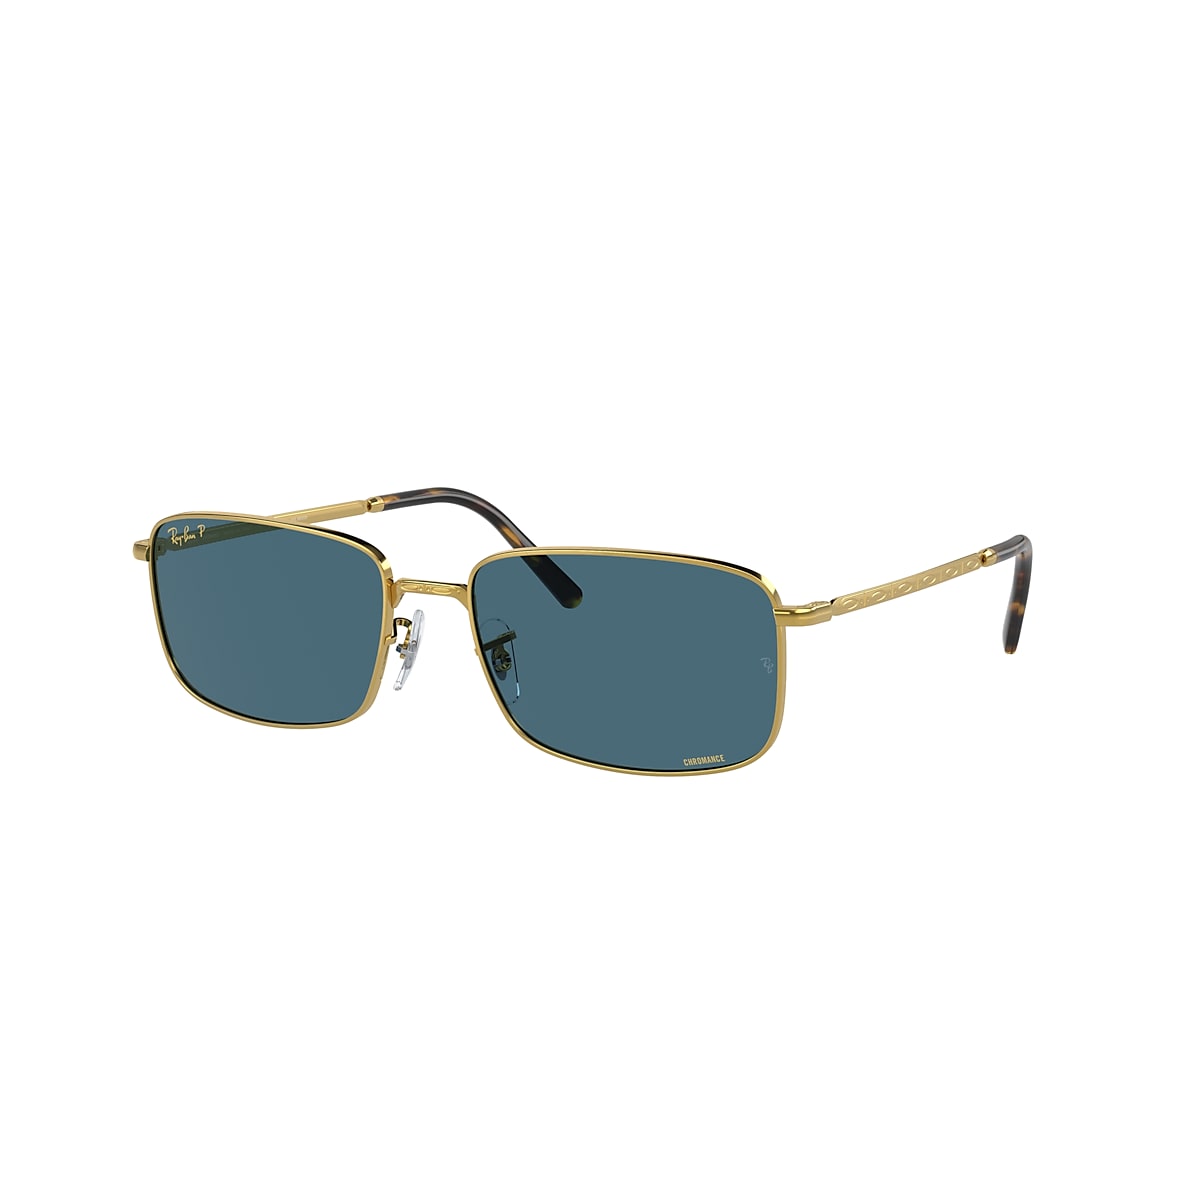 RB3717 Sunglasses in Gold and Blue - RB3717 | Ray-Ban® NO